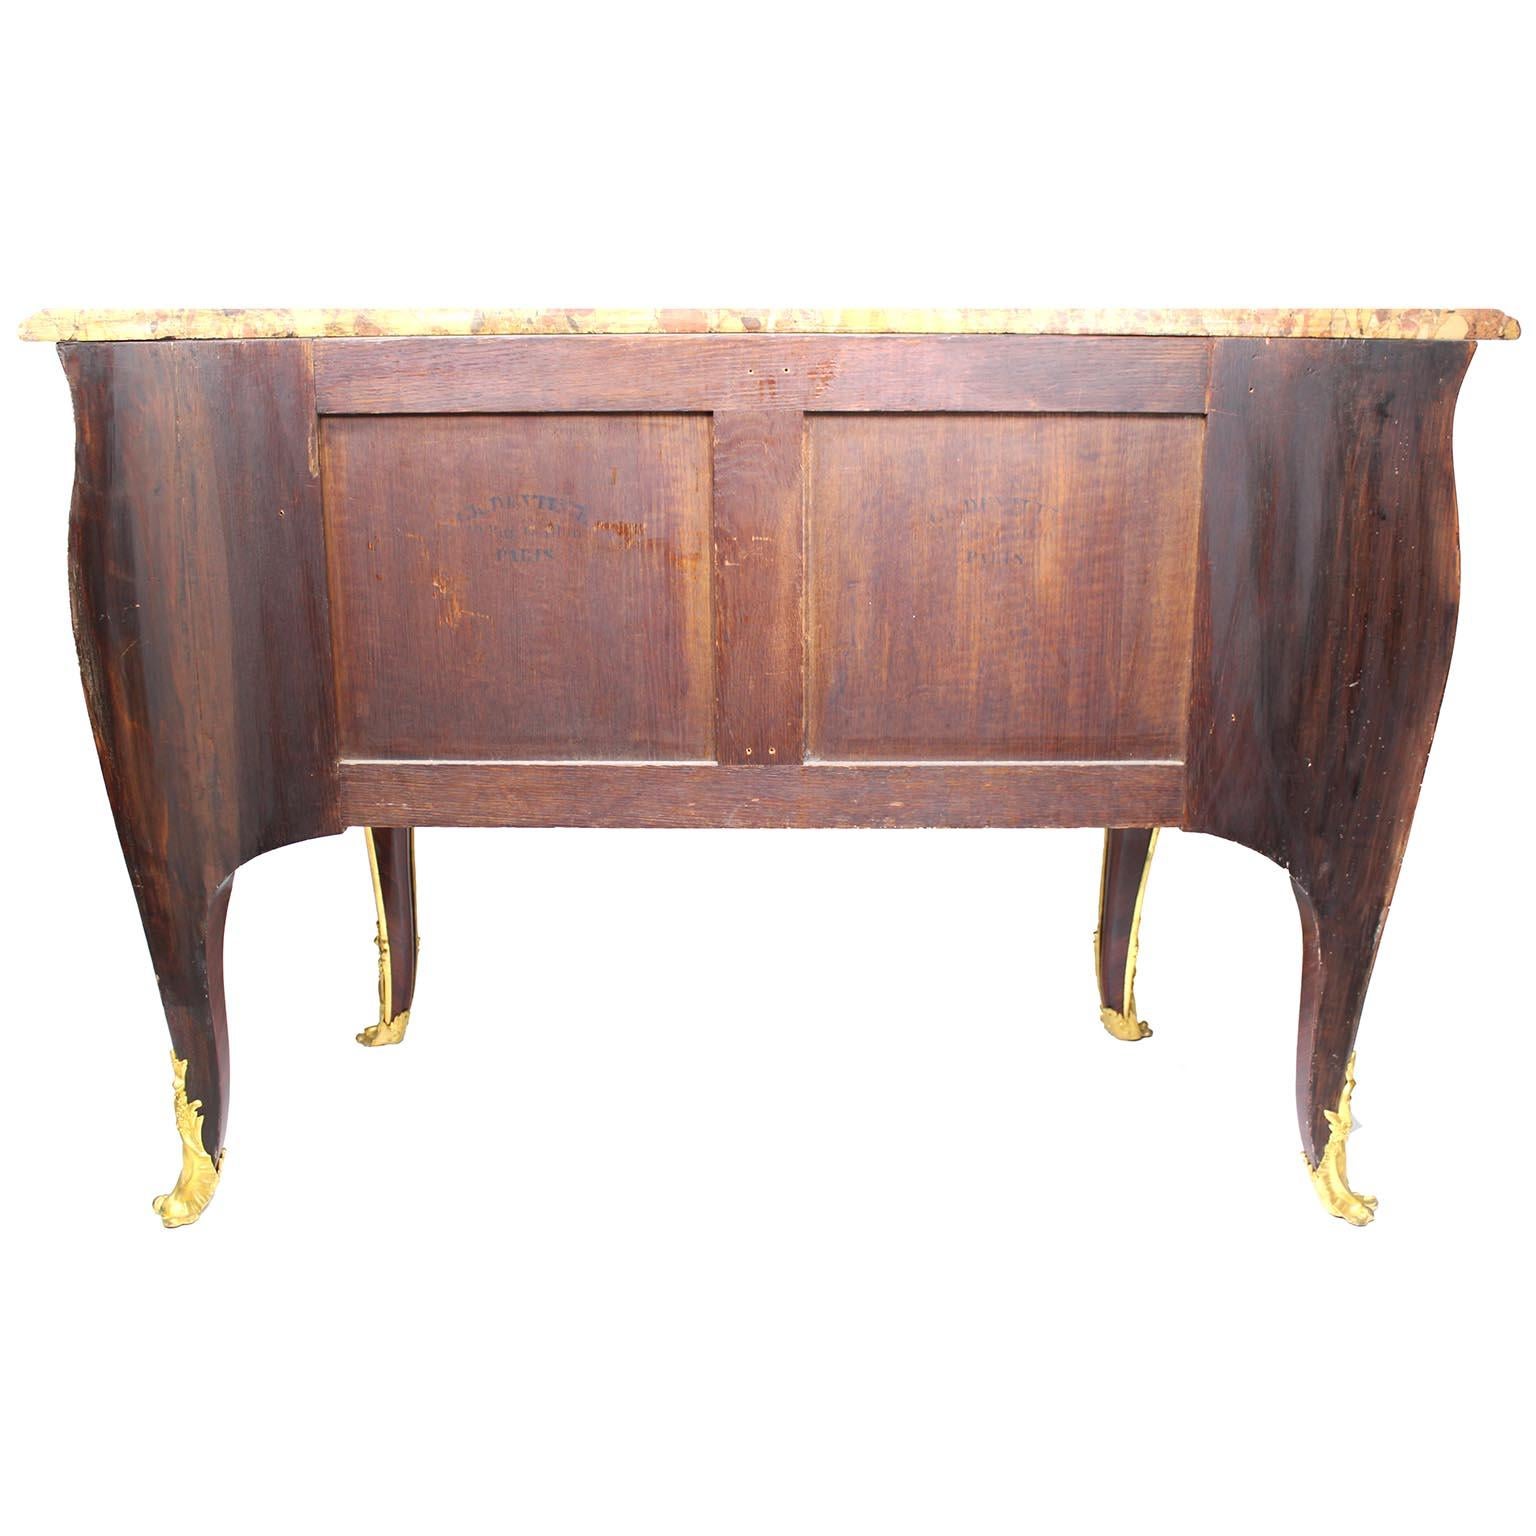 Fine French Louis XV Style Ormolu-Mounted Bombe Commode Attr. to François Linke For Sale 10